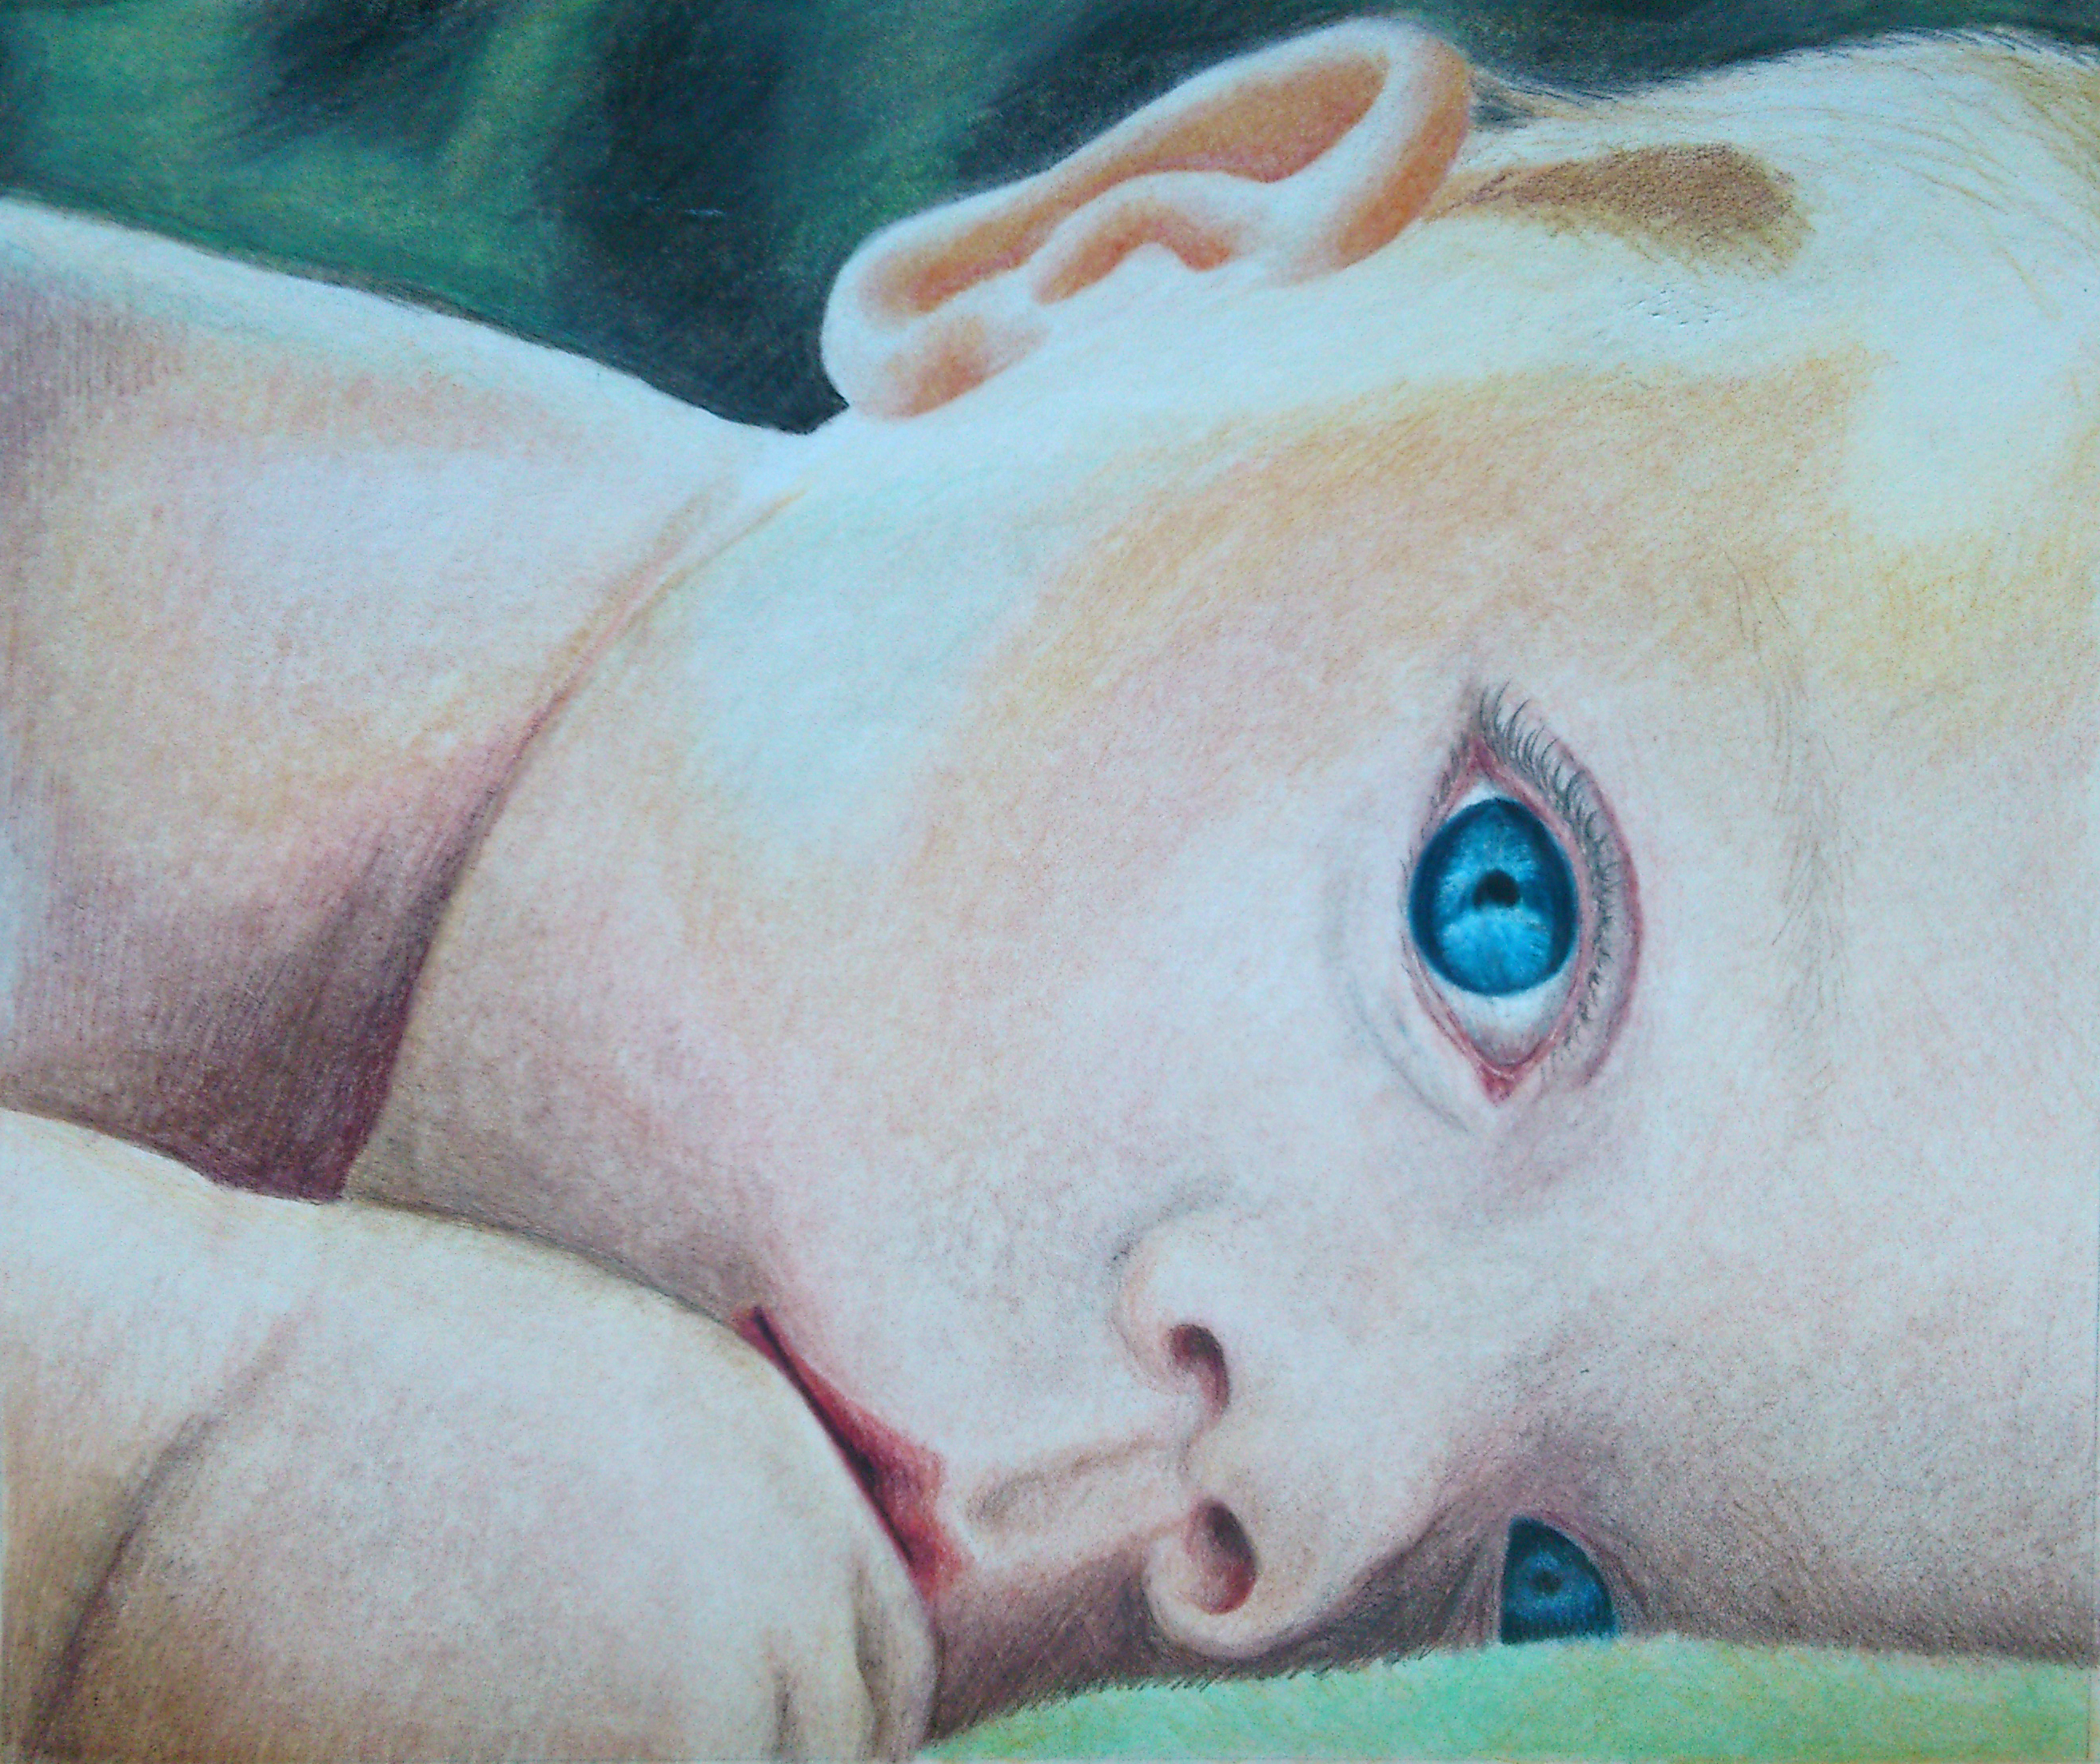 Baby boy (colored pencil) by KamilaM94 on DeviantArt